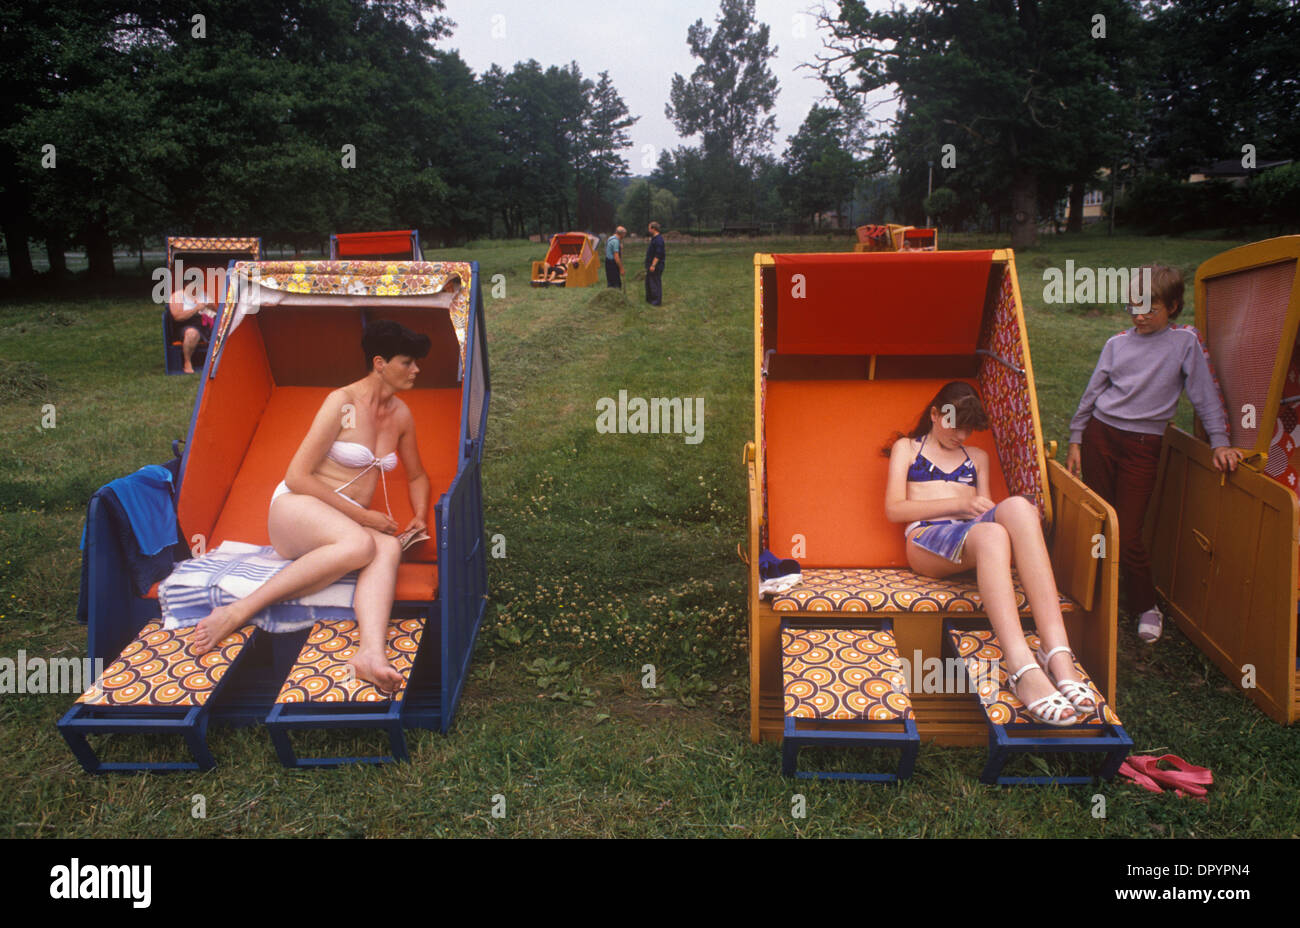 Boitzenburg, East Germany. East German army families using double size deckchairs at a state holiday resort paid in part for by the government 1990s  HOMER SYKES Stock Photo